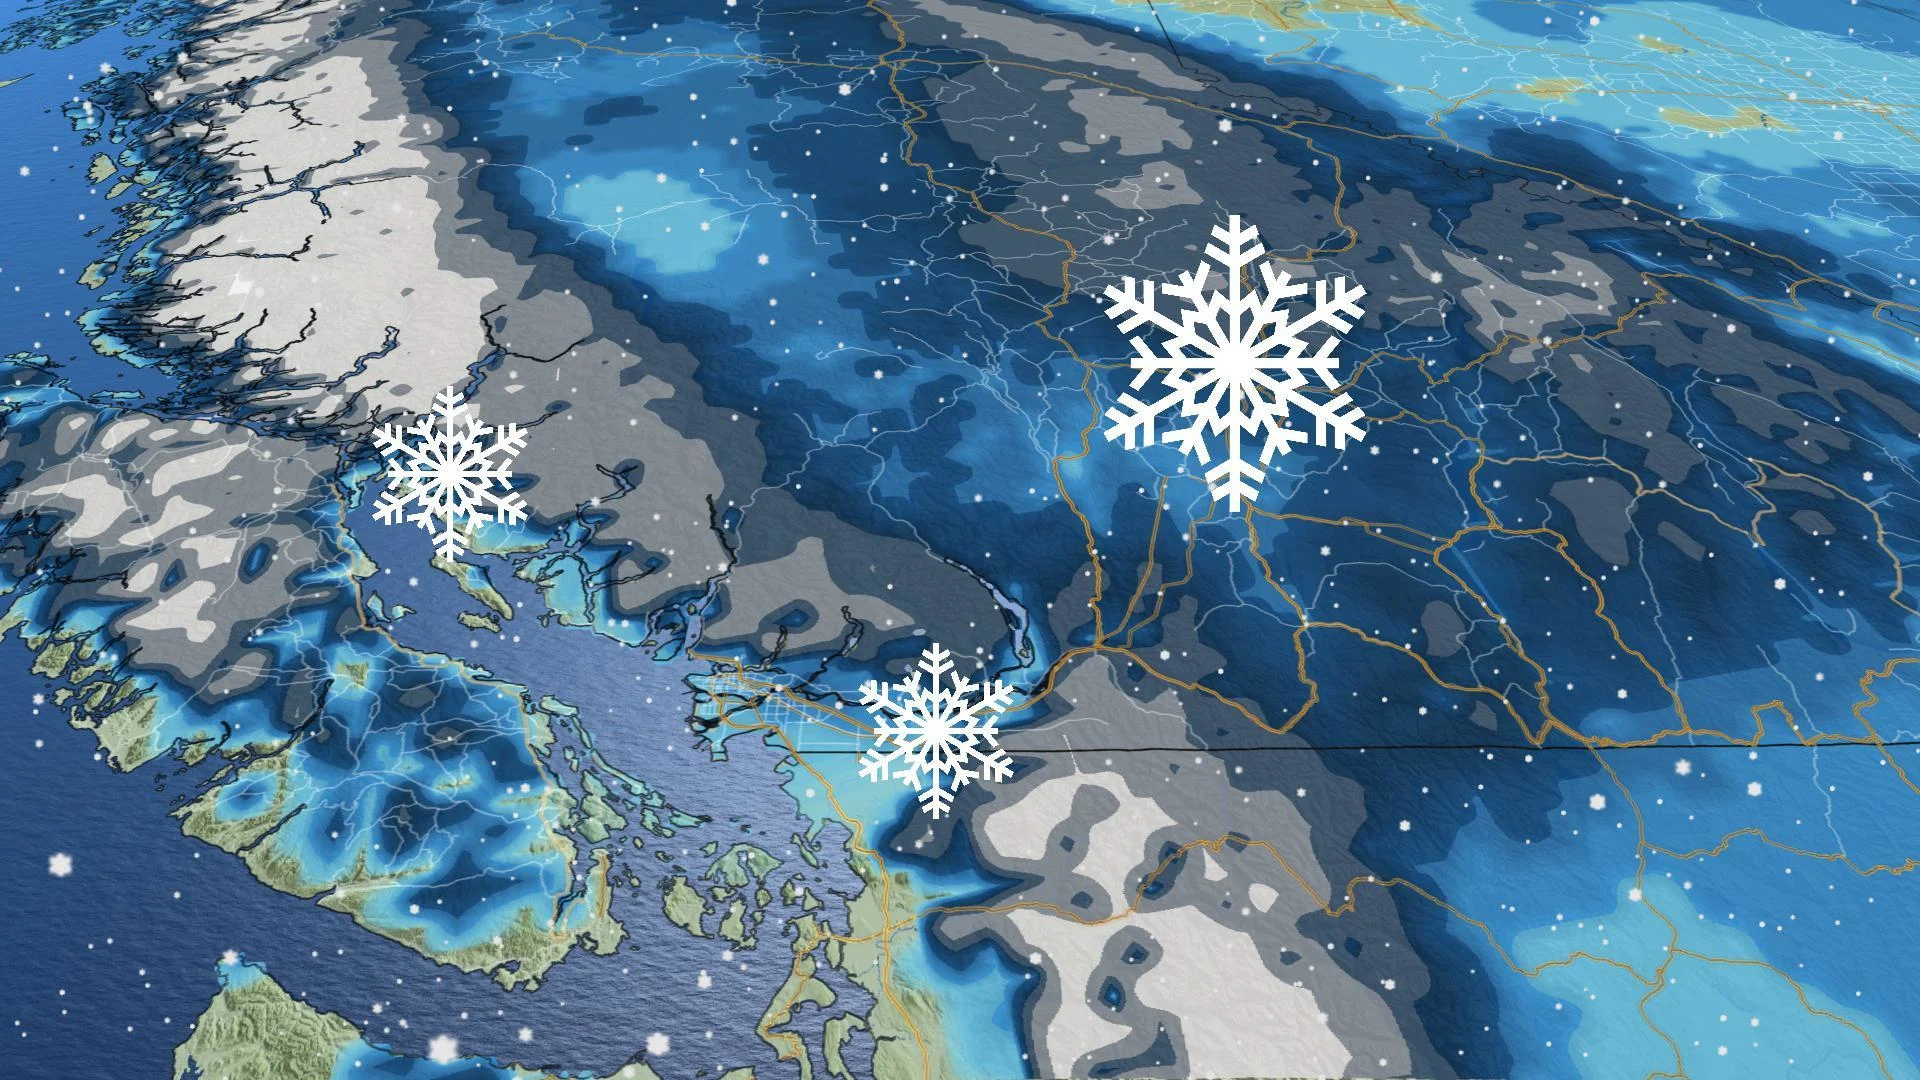 B.C.: Snowfall warnings issued for South Coast, including Vancouver